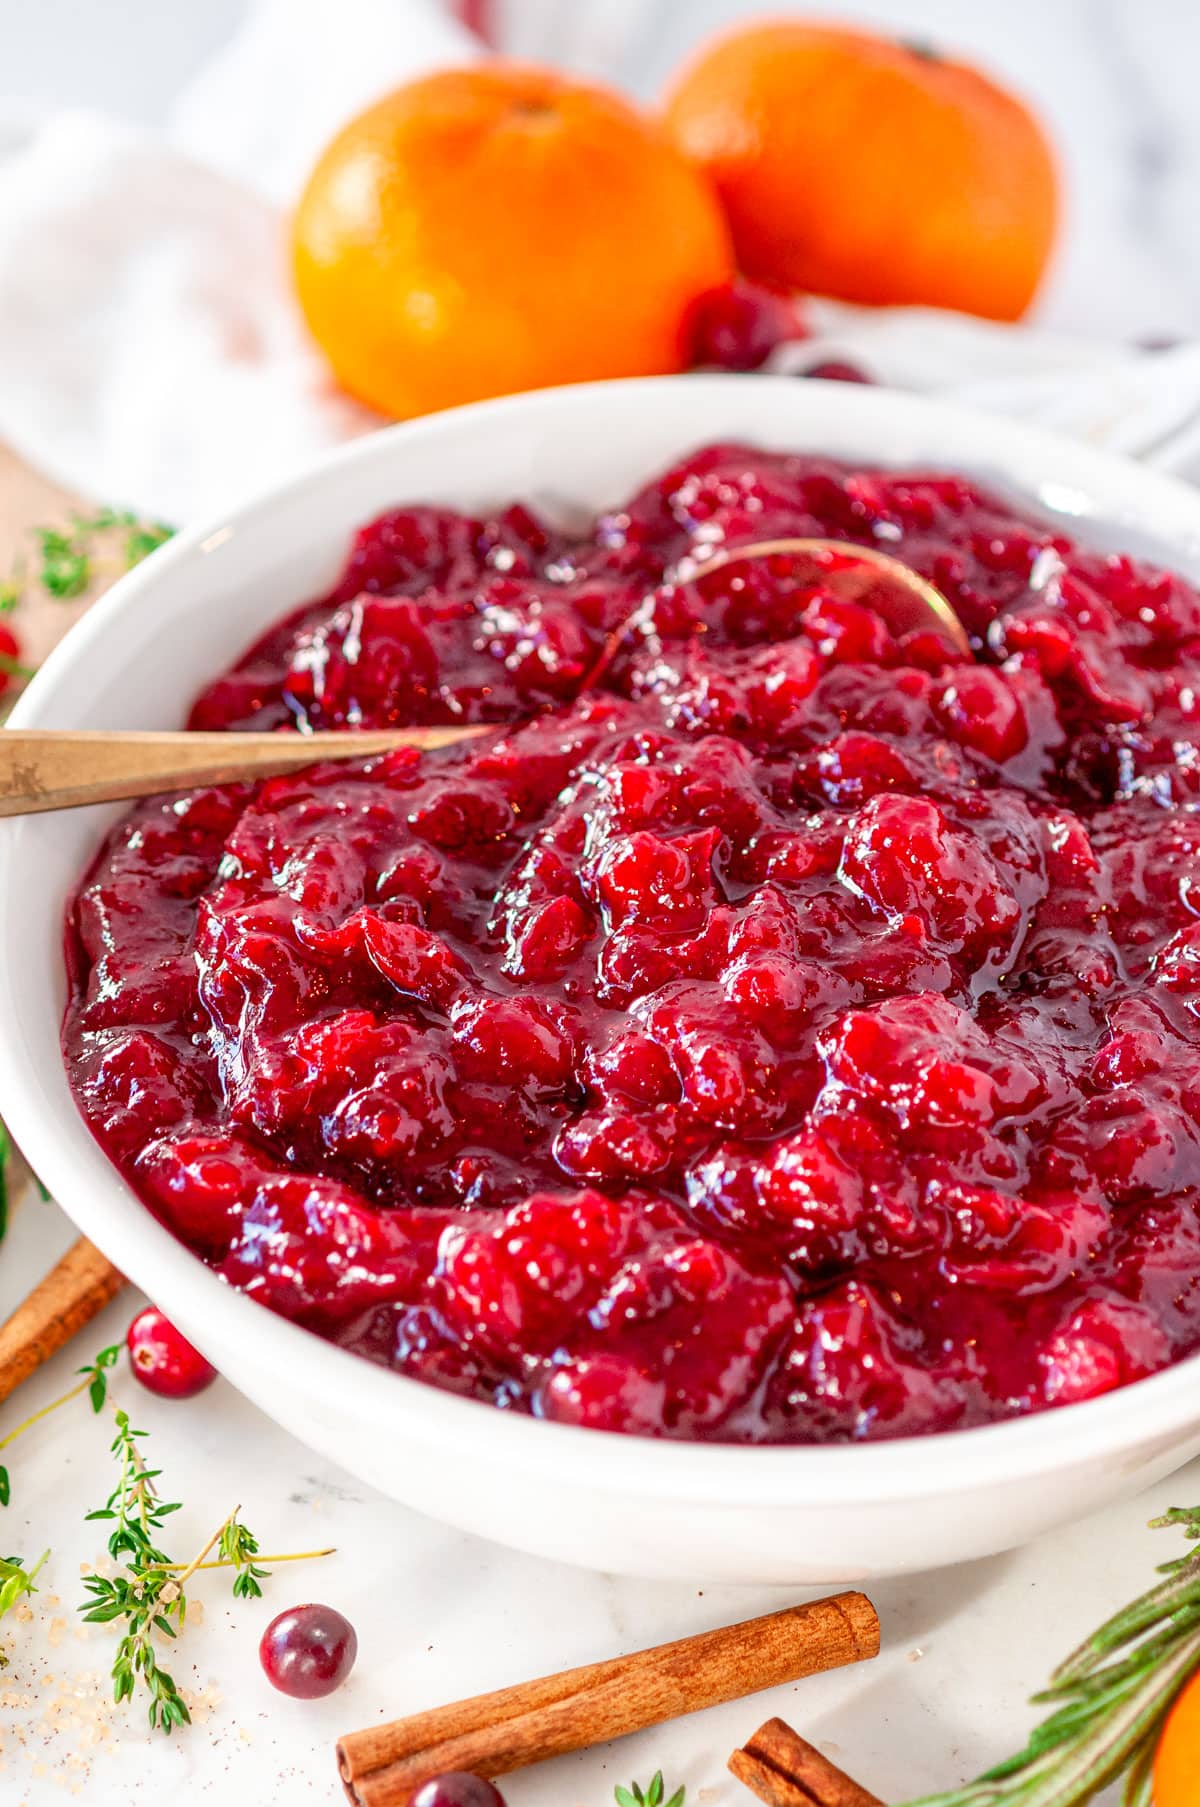 Holiday Orange Cranberry Sauce in white bowl with gold spoon, fresh rosemary, thyme, oranges, and cinnamon sticks on white marble